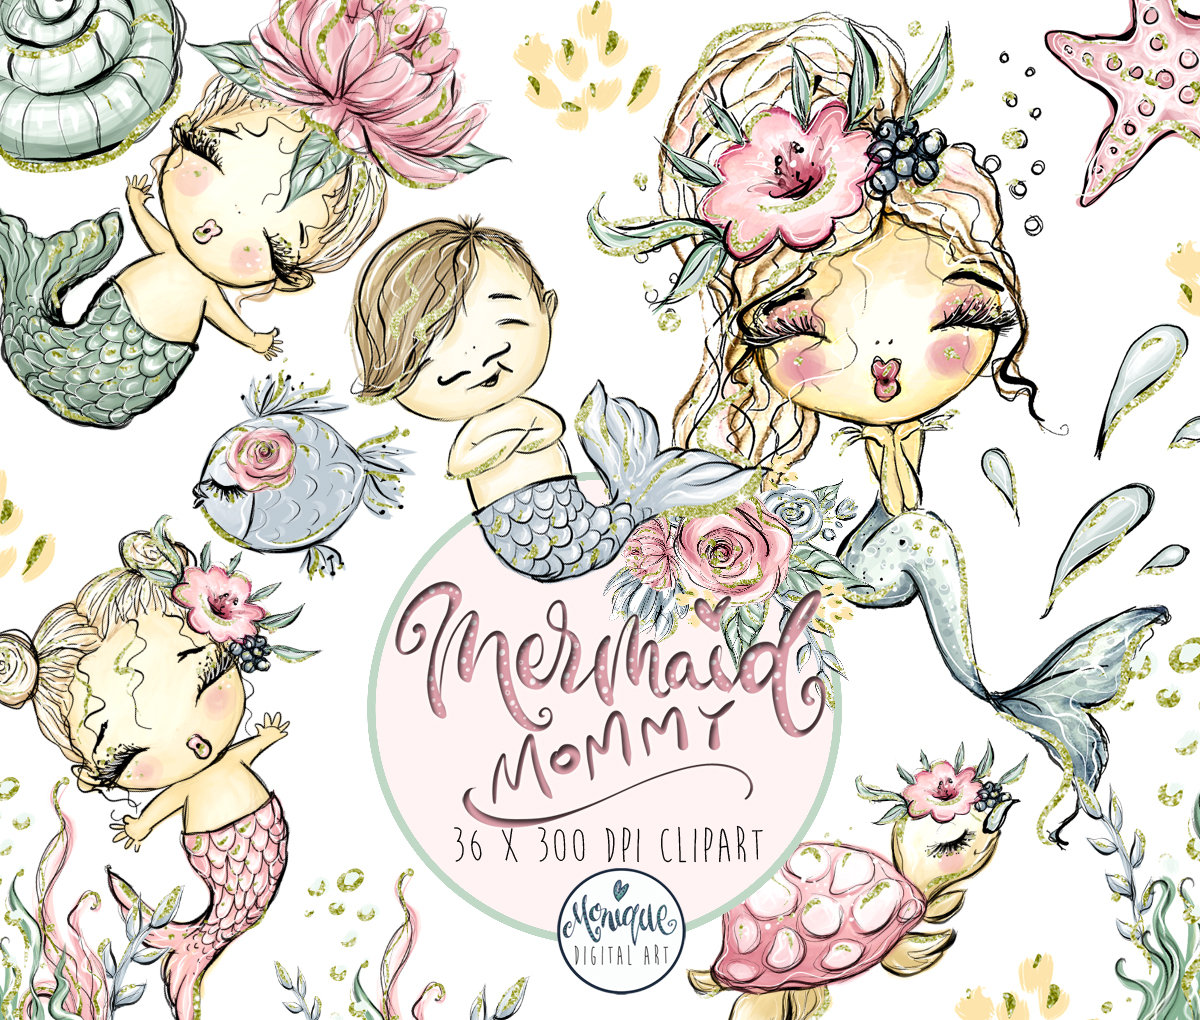 Boho clipart mermaid. Glittermother and babygirls room